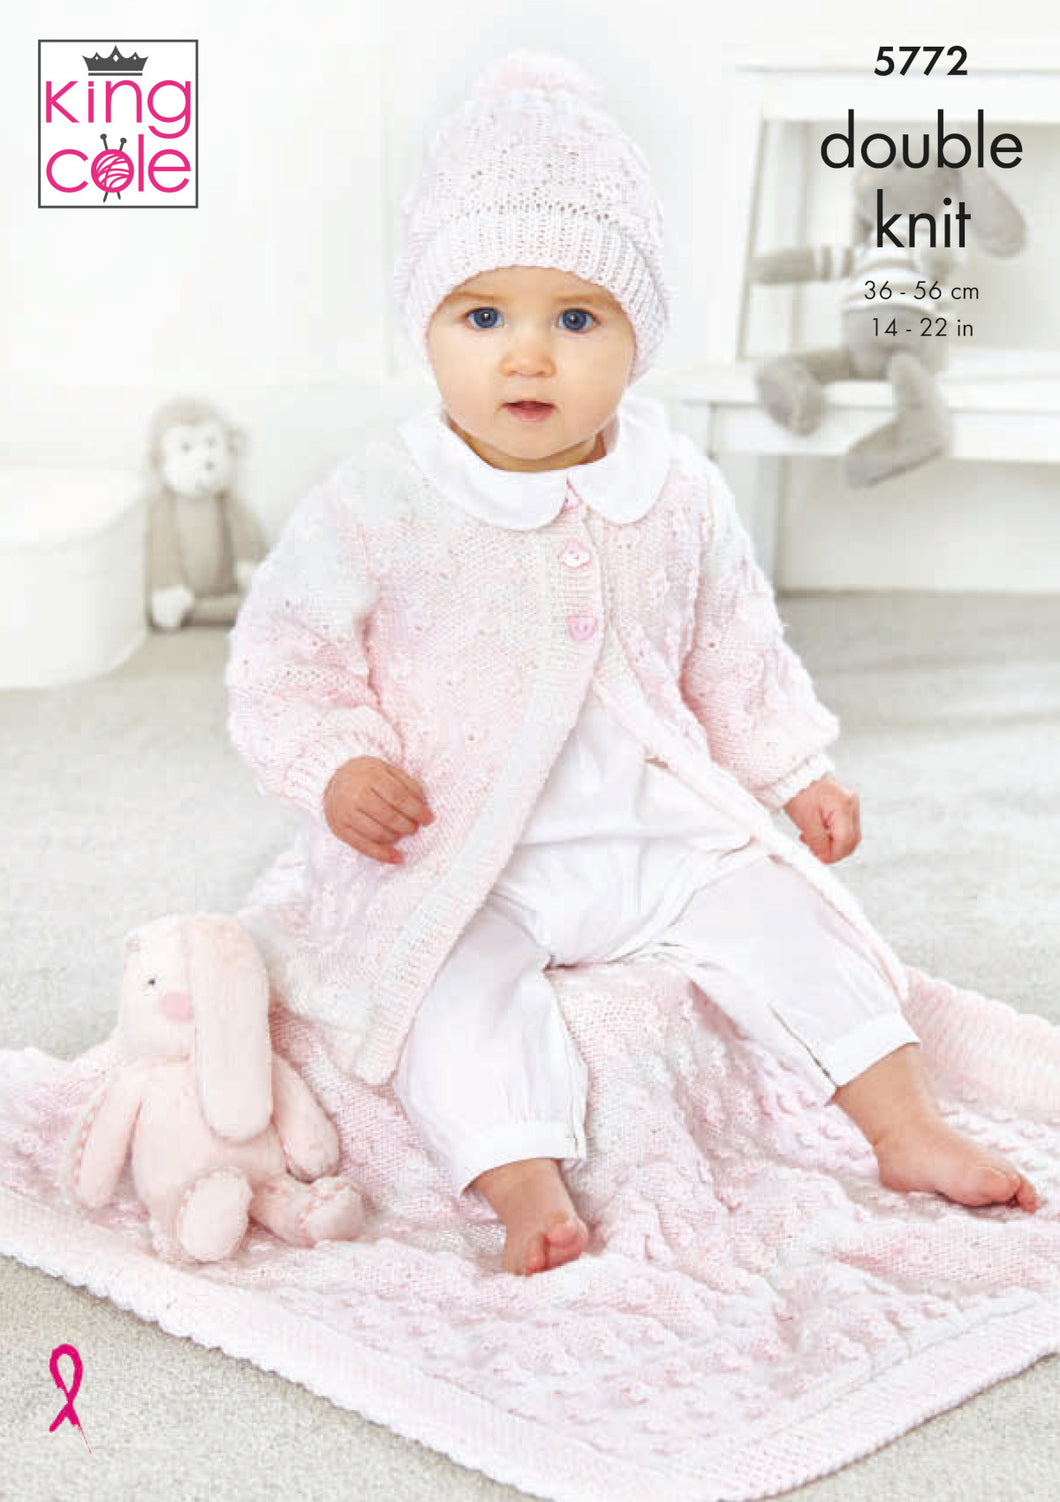 King Cole Double Knit Knitting Pattern - Baby Cardigan Hat & Blanket (5772)